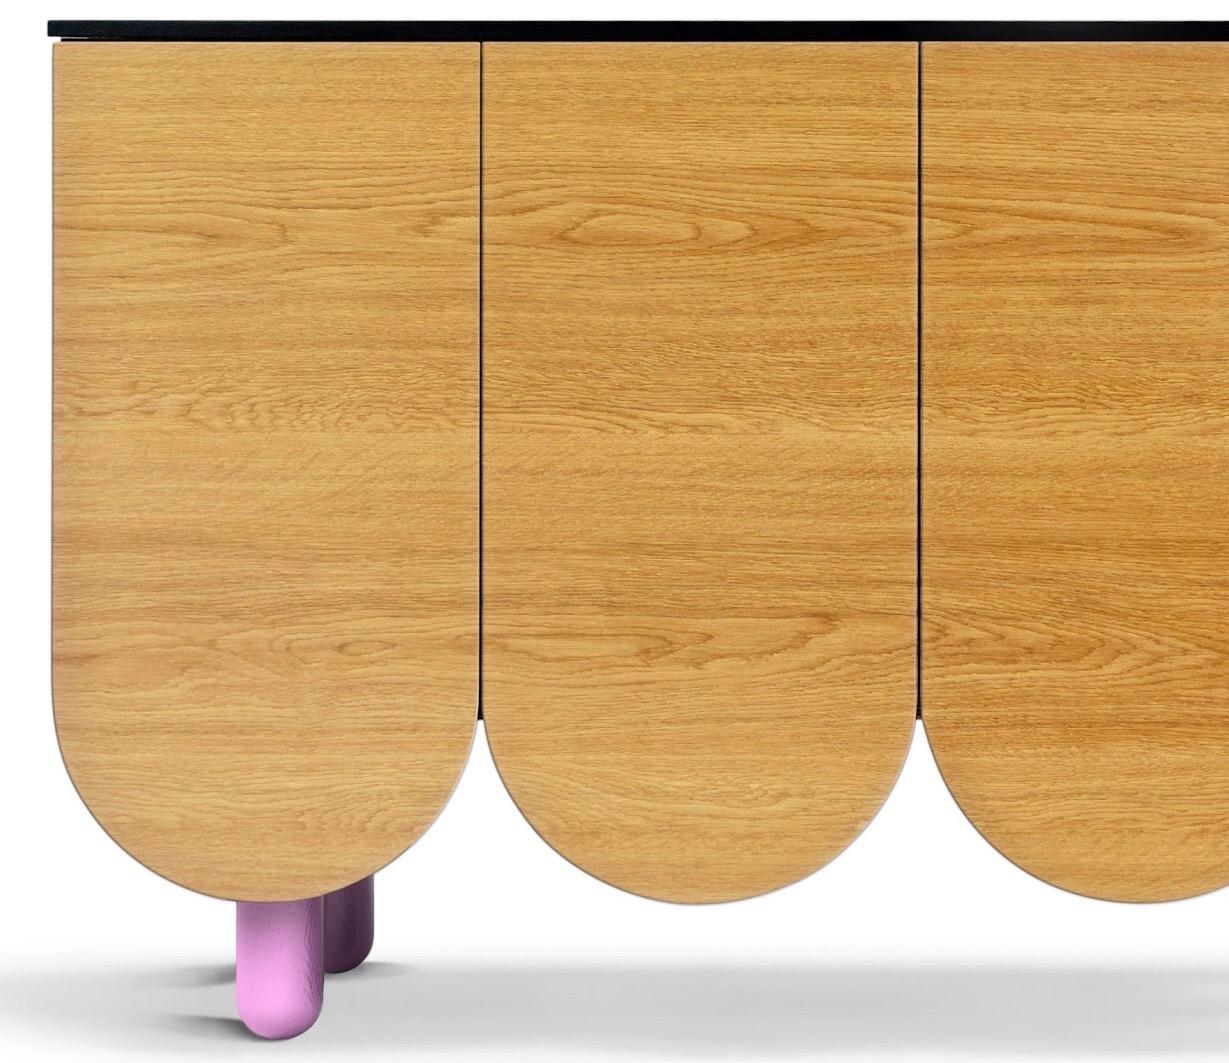 A beautiful Oak Sideboard with pleasing curved doors across which the wood grain follows seamlessly through the doors.
This piece allows for a choice of pink, yellow, black or natural oak feet. If there’s a specific feet colour you’d like, get in